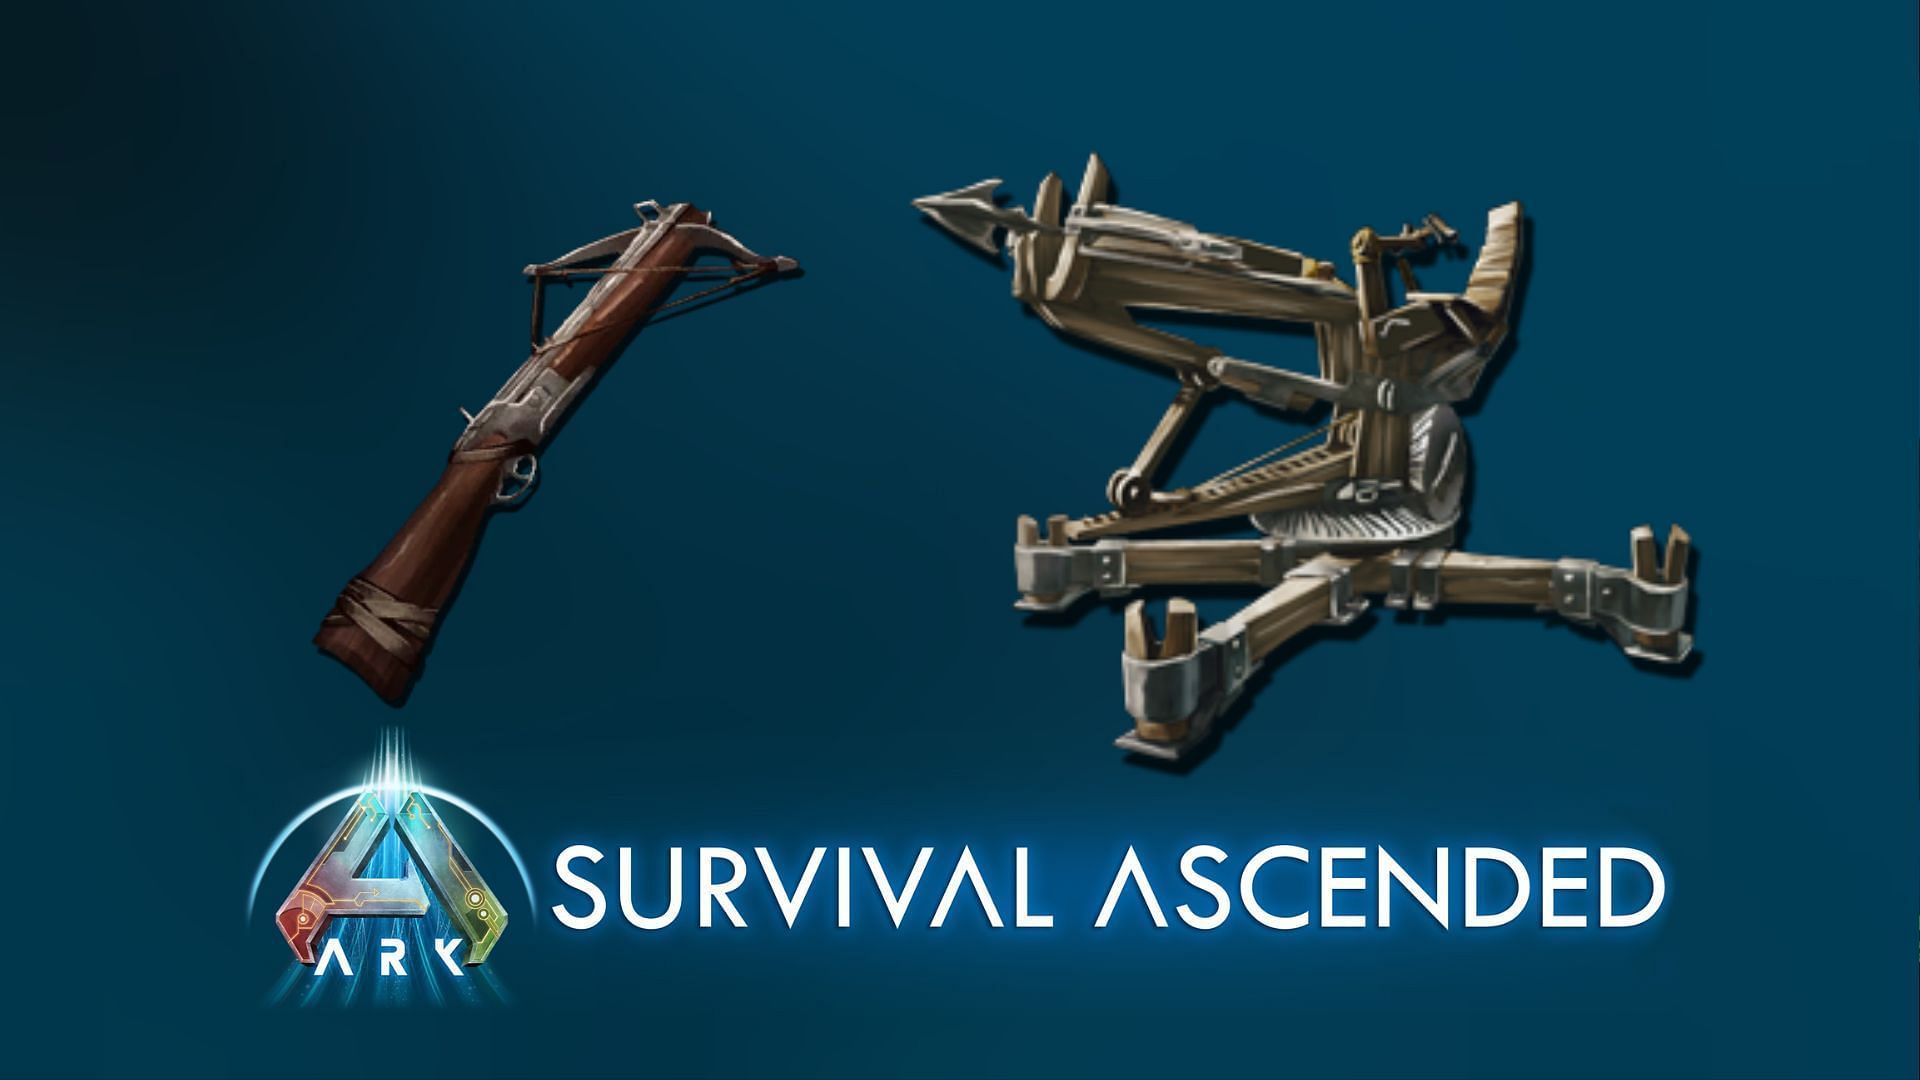 All metal weapons and how to craft them in Ark Survival Ascended (Image via Studio Wildcard)